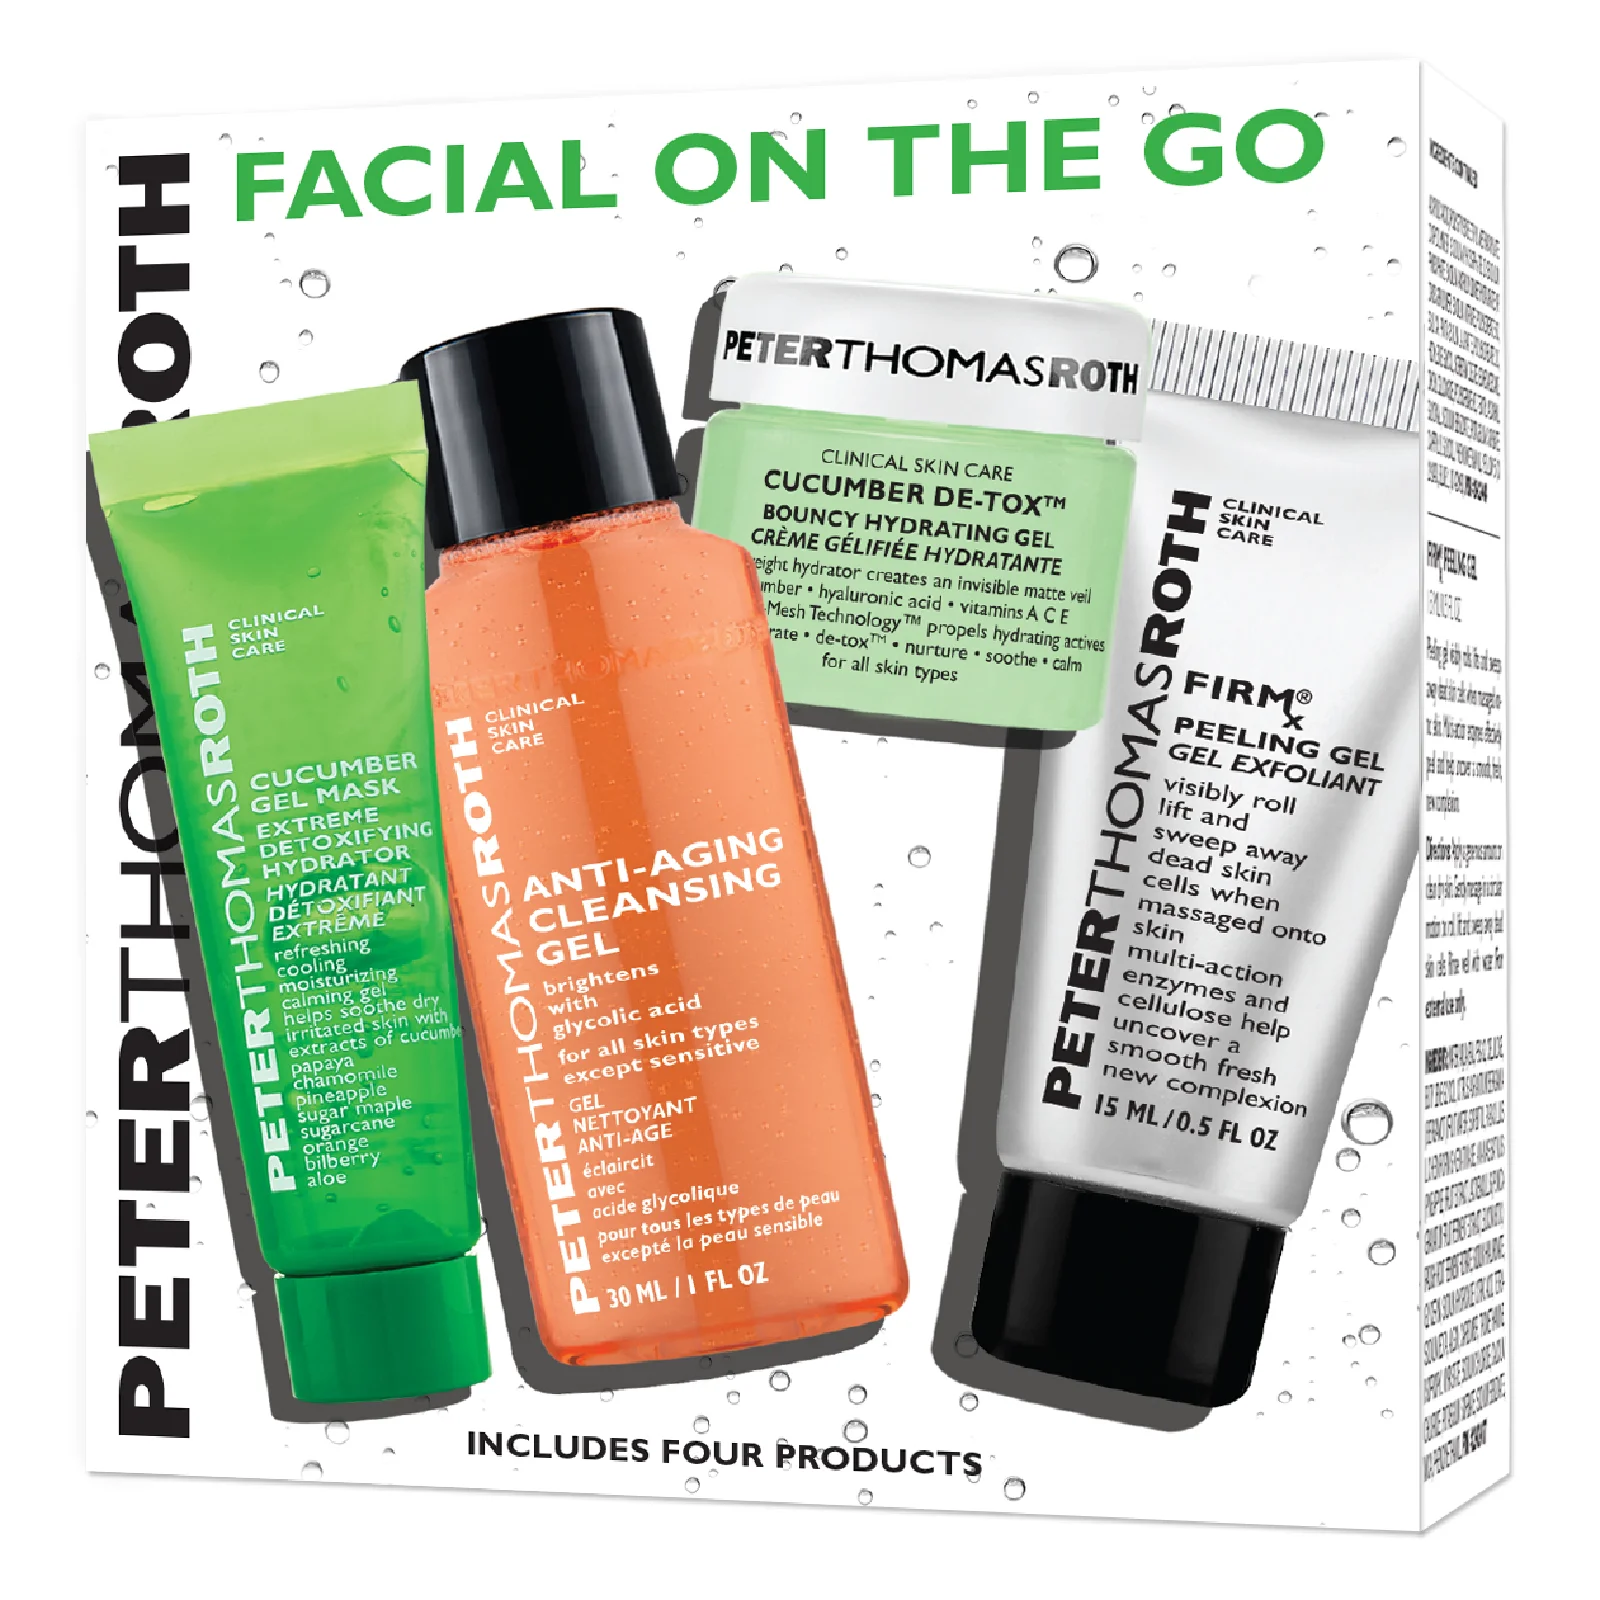 Peter Thomas Roth Facial On The Go Image 1